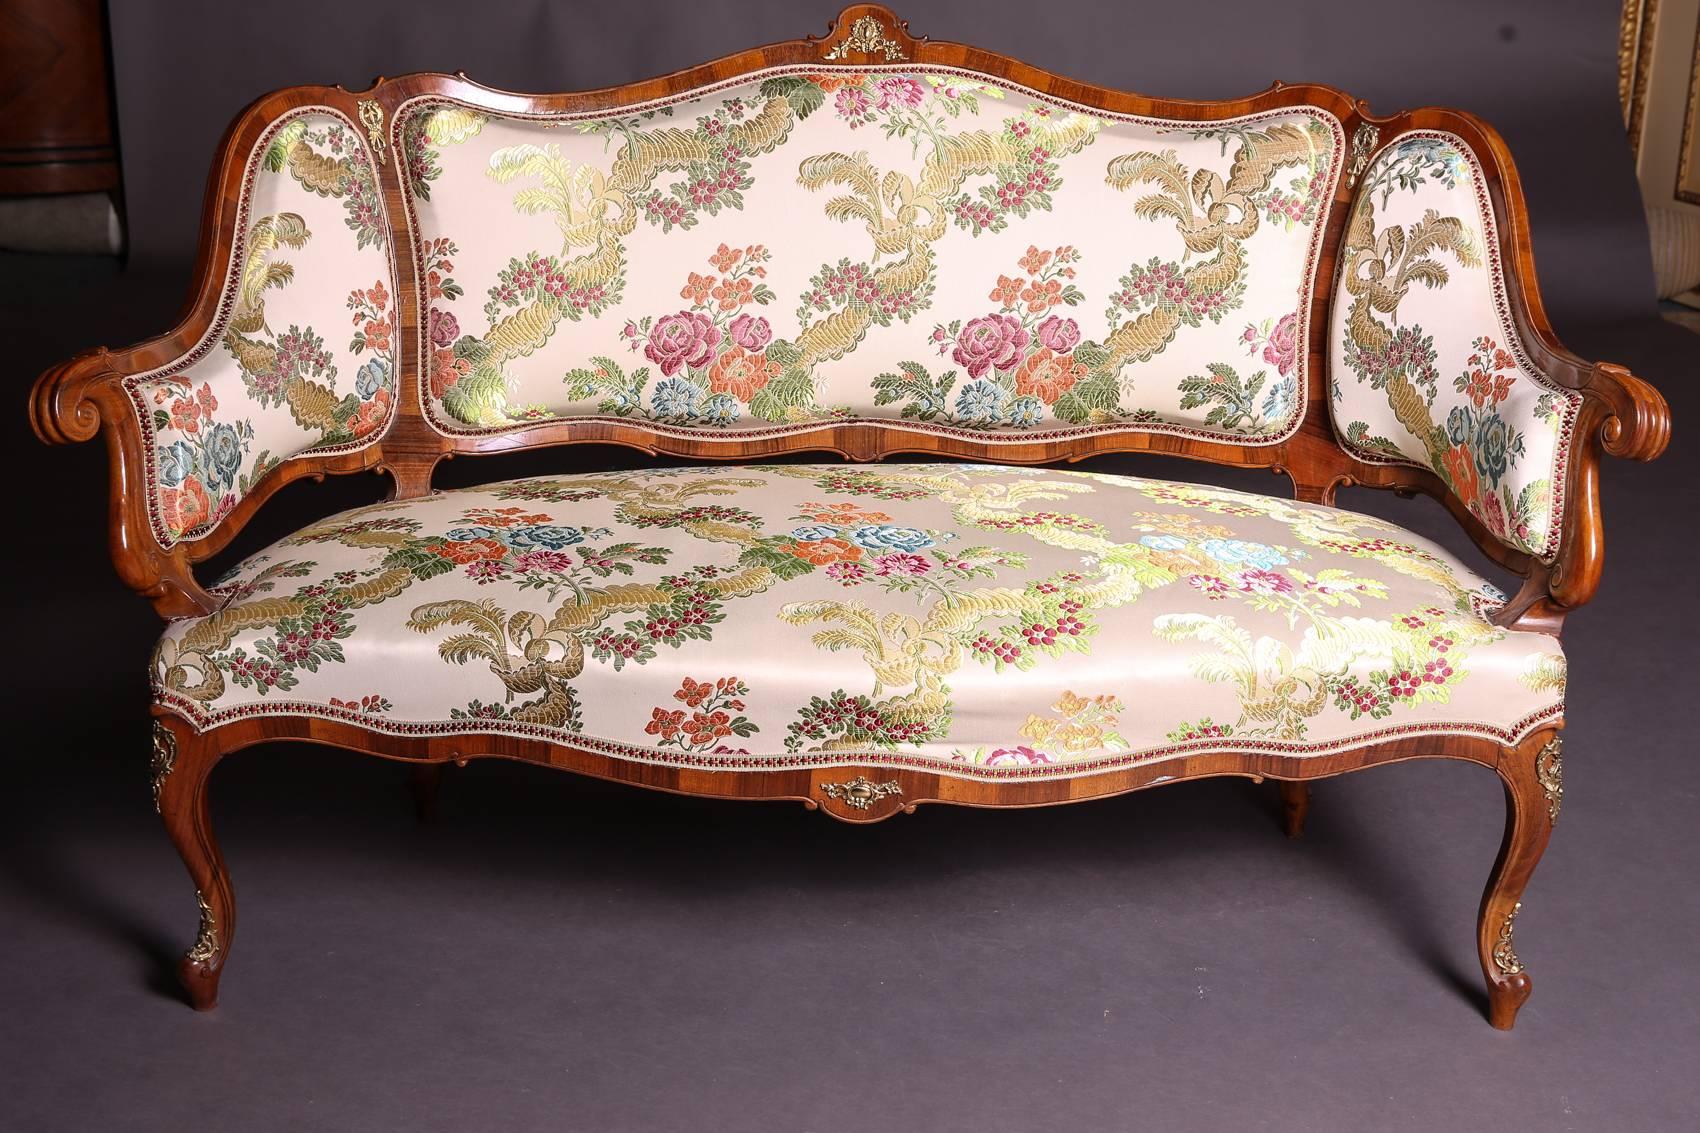 Four chairs with a sofa in Dresden baroque style. Walnut freed and felted. Rich gilded bronze appliqués, on the backs with perimeter bar contours. Saxony, circa 1880-1890.

Dimensions:
Canapé H 92 cm, W 149 cm, D 77
Chair H 93 cm, W 45 cm, D 47